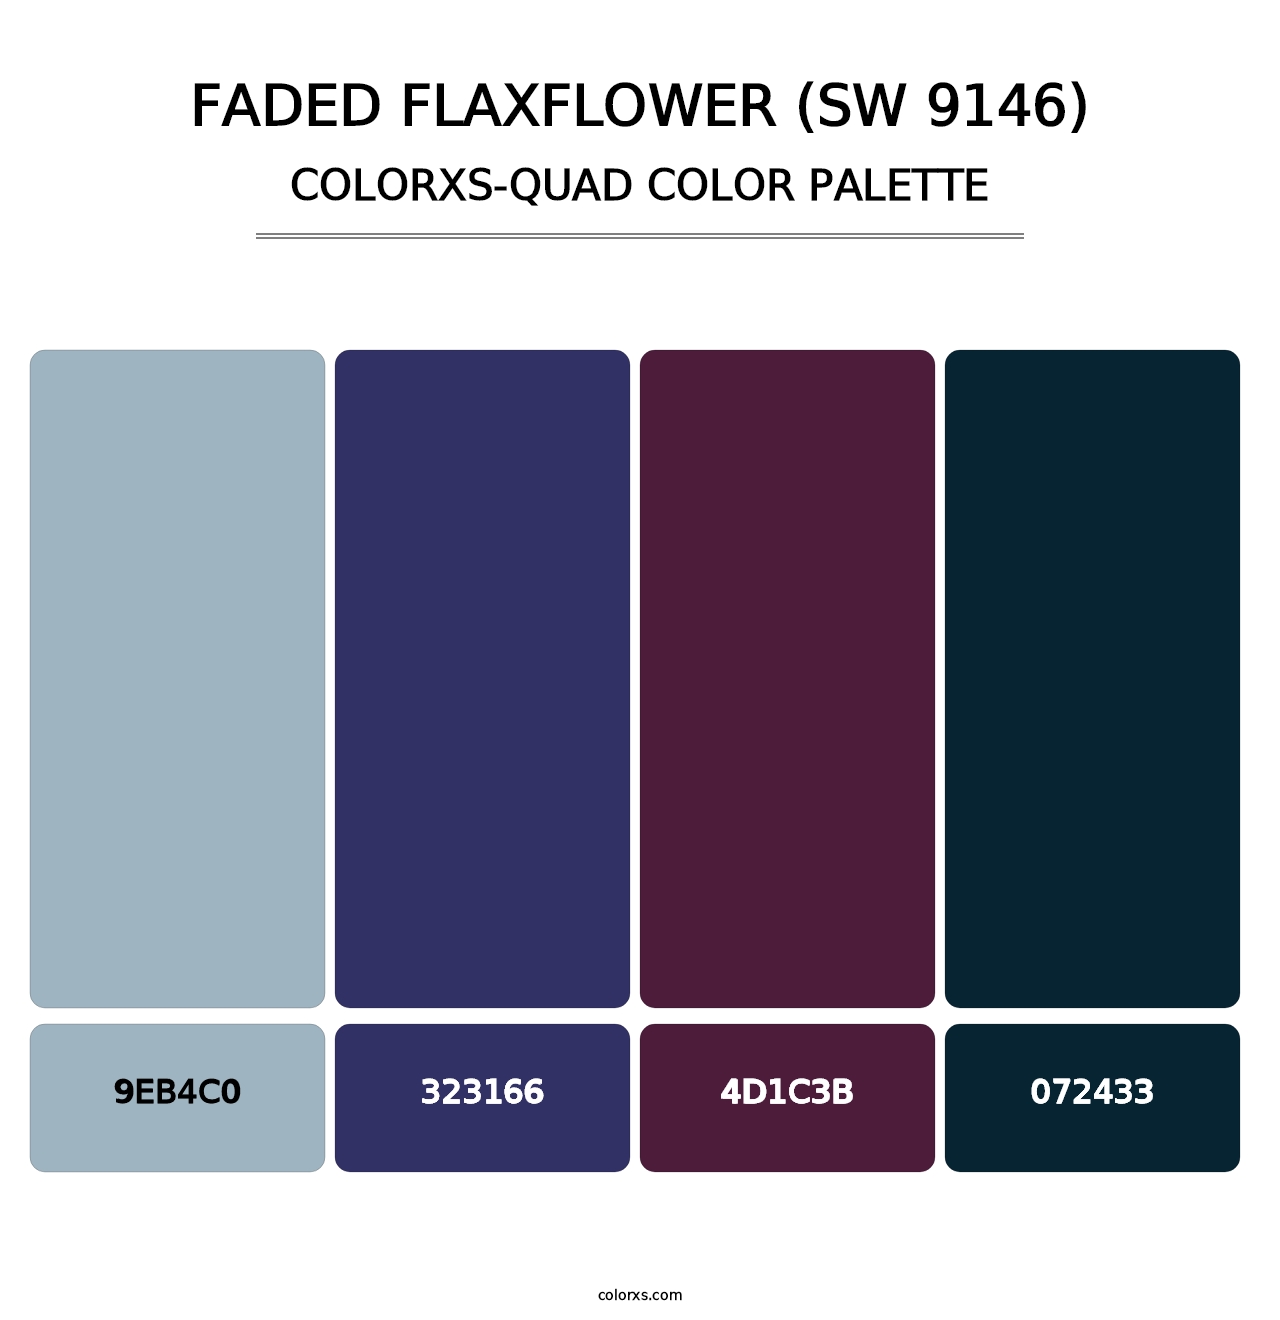 Faded Flaxflower (SW 9146) - Colorxs Quad Palette